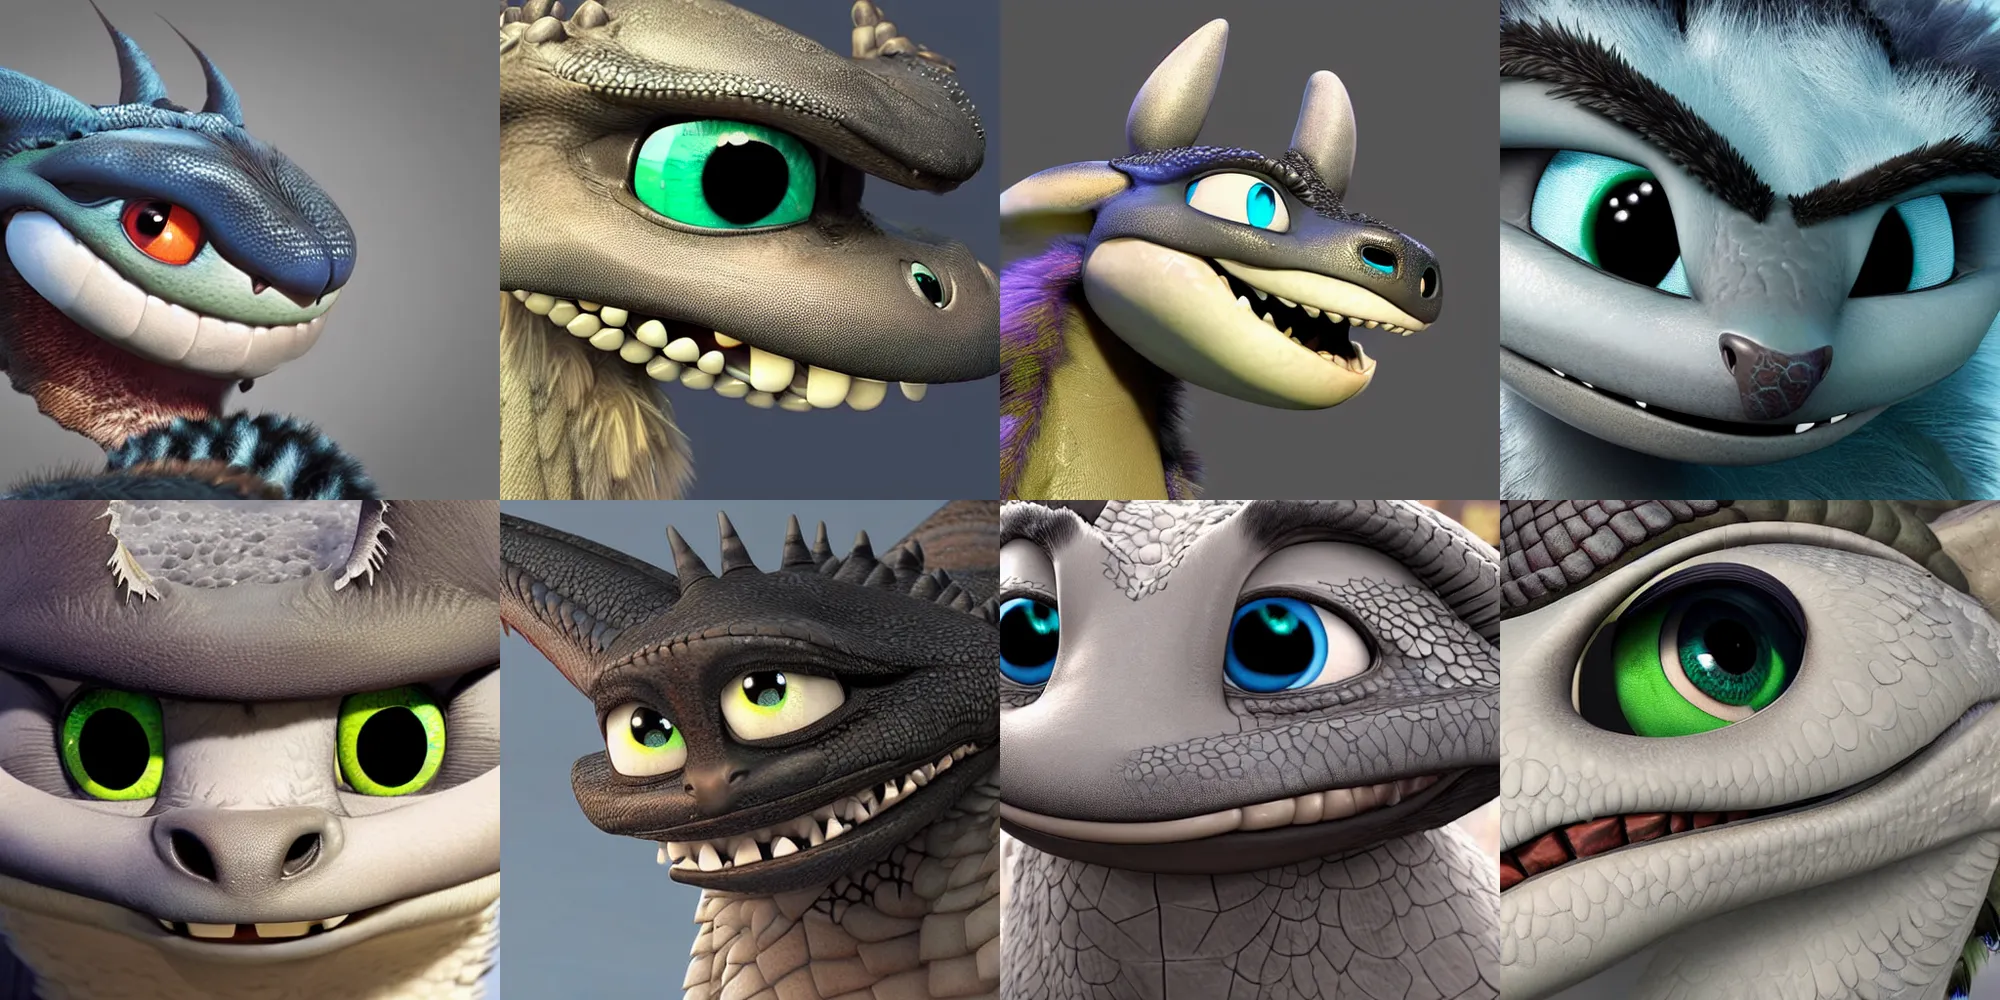 Prompt: close up headshot extremely detailed Concept, 3d Dragon concept artwork character design by Disney Pixar, in the style of ‘how to train your dragon’, ‘luca’, ‘zootopia’, ‘raya and the last dragon’ etc, high detail, detailed feathers, textures, scales and fur, 3d render